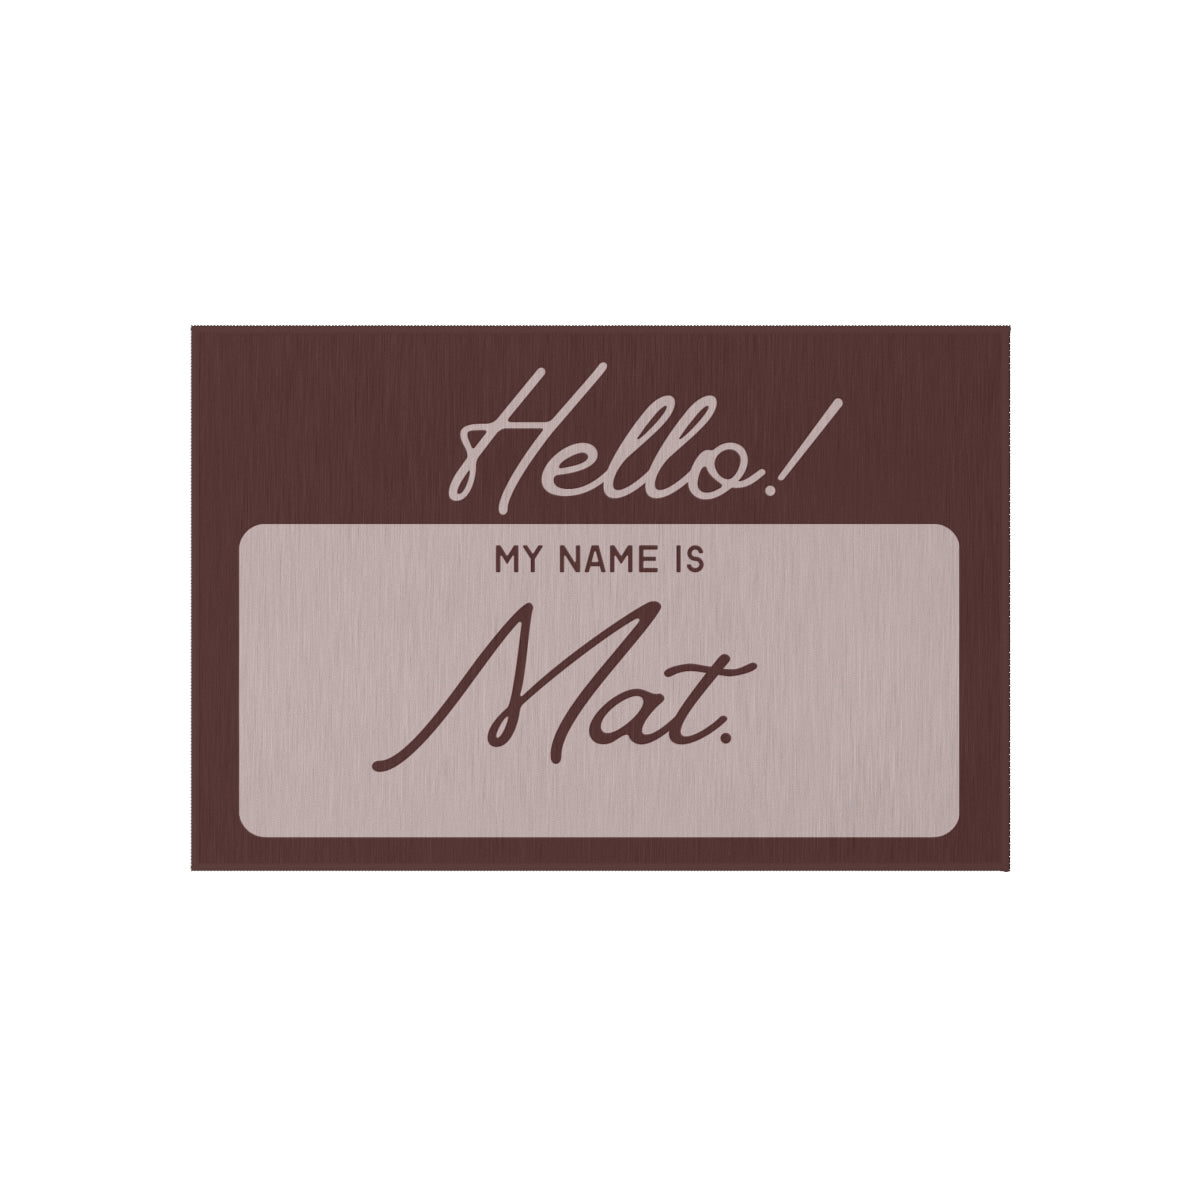 Hello My Name Is… Outdoor Rug - Custom for your Home, Campervan, RV, Vintage Trailer, Campsite, Glamping